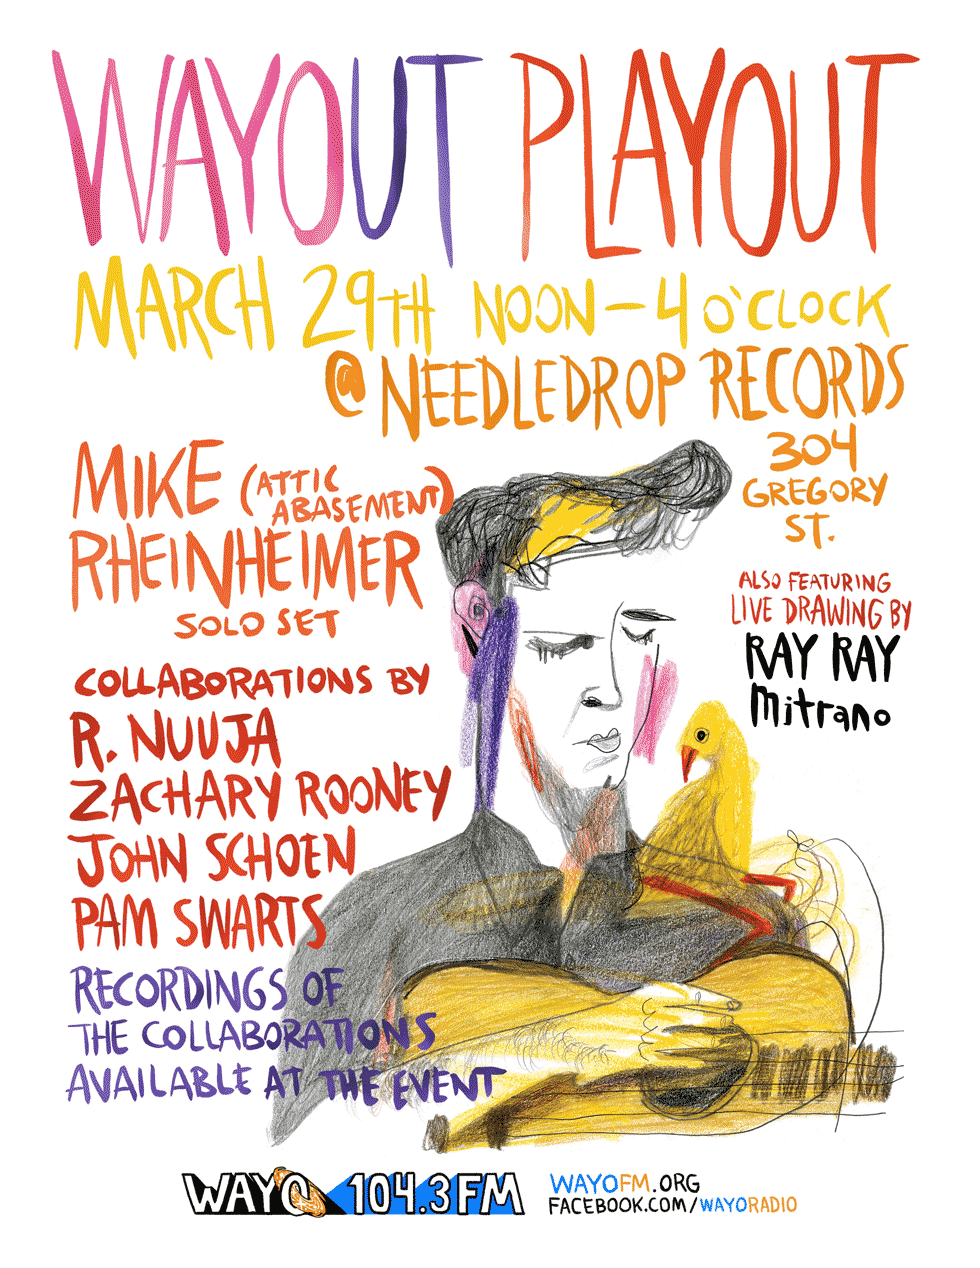 On March 29 at Needledrop Records four musicians - R. Nuuja, Zachary Rooney, John Schoen, and Pam Swarts - will collaborate to create two 15 minute pieces live in the store.